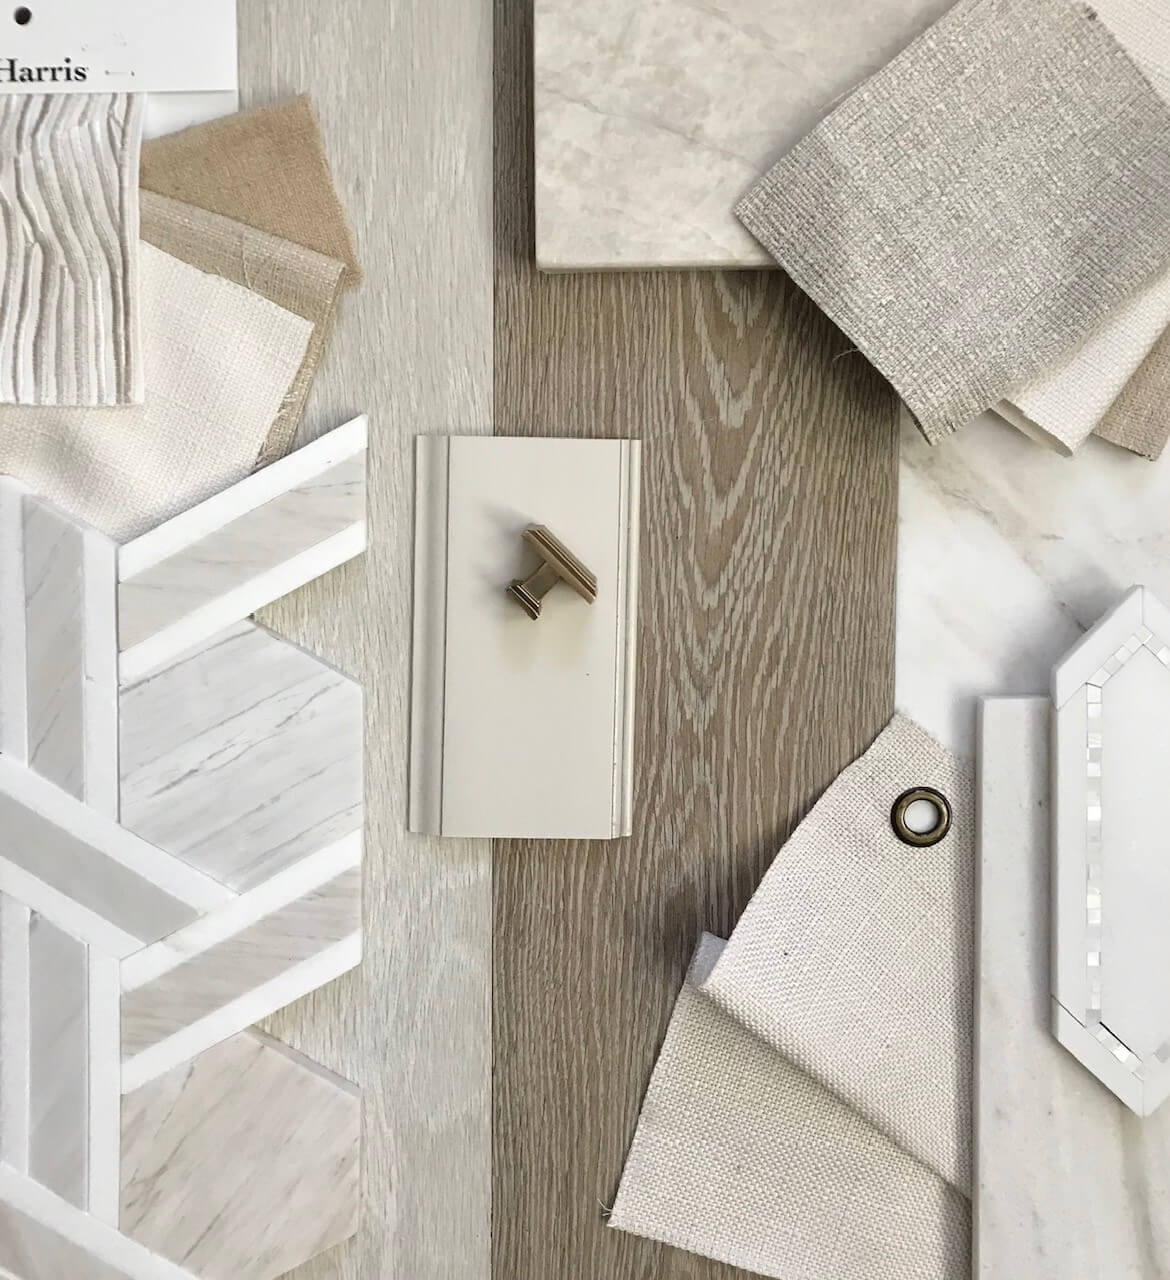 A neutral color palette for a home interior design with colors and textures that are inspired by elements of nature.